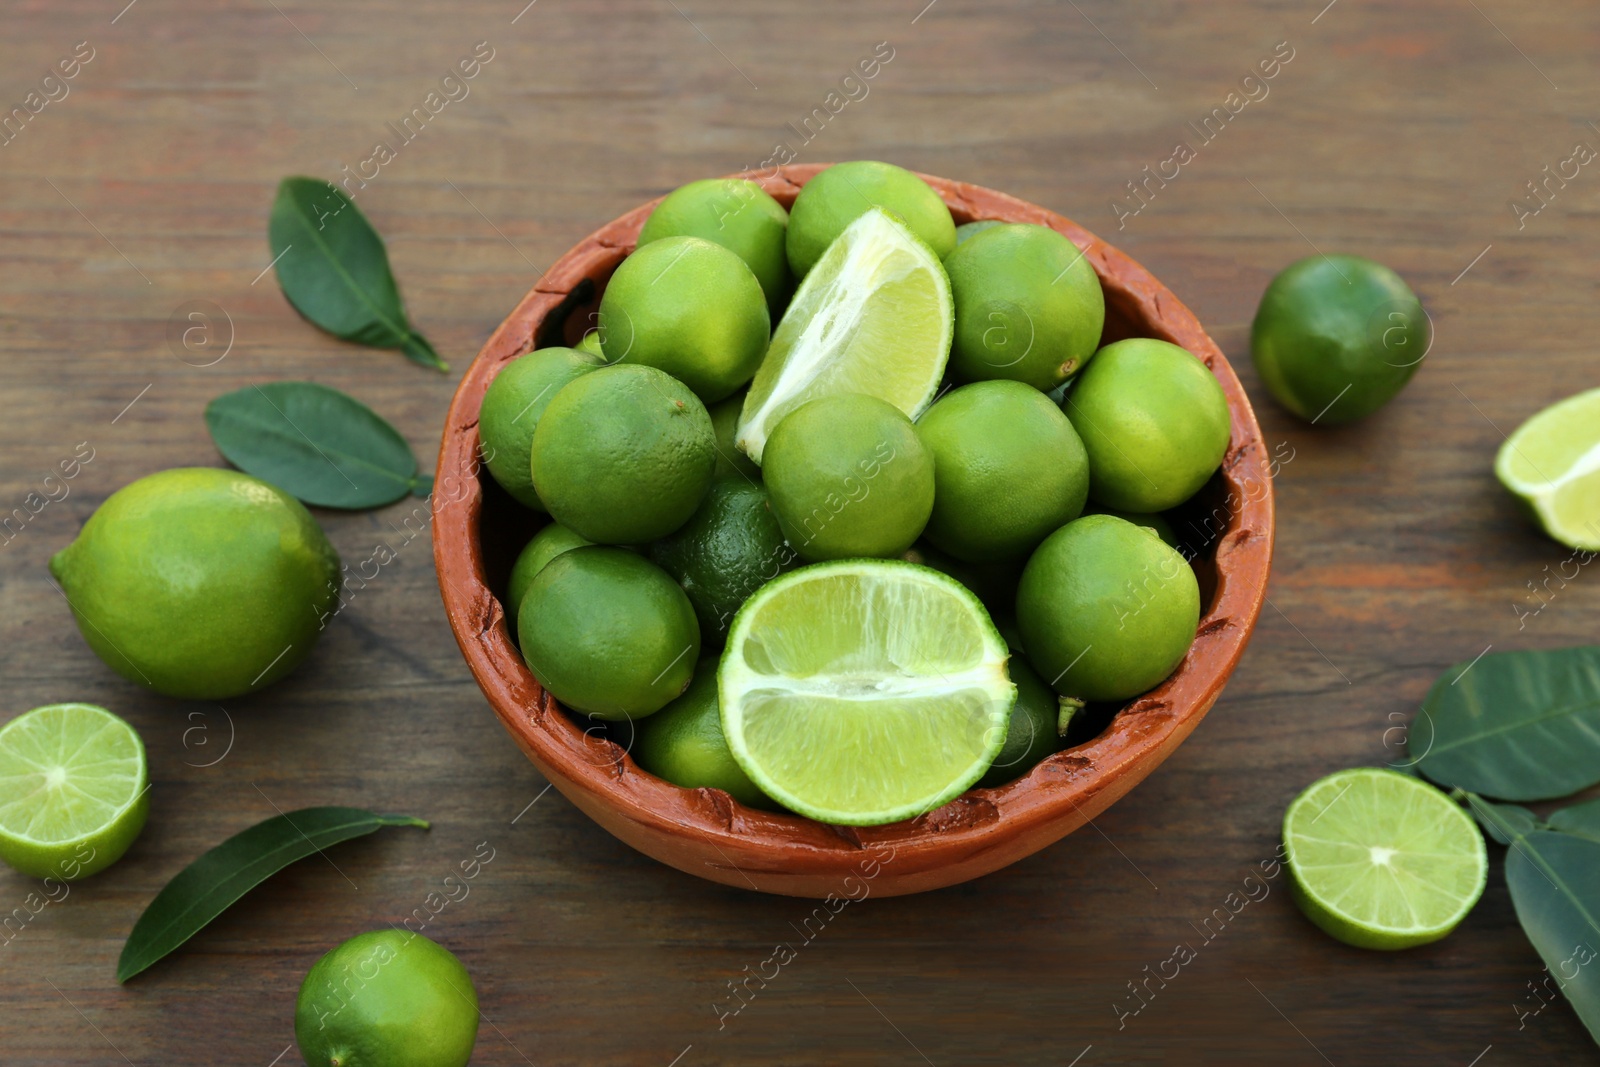 Photo of Whole and cut fresh ripe limes with green leaves in bowl on wooden table